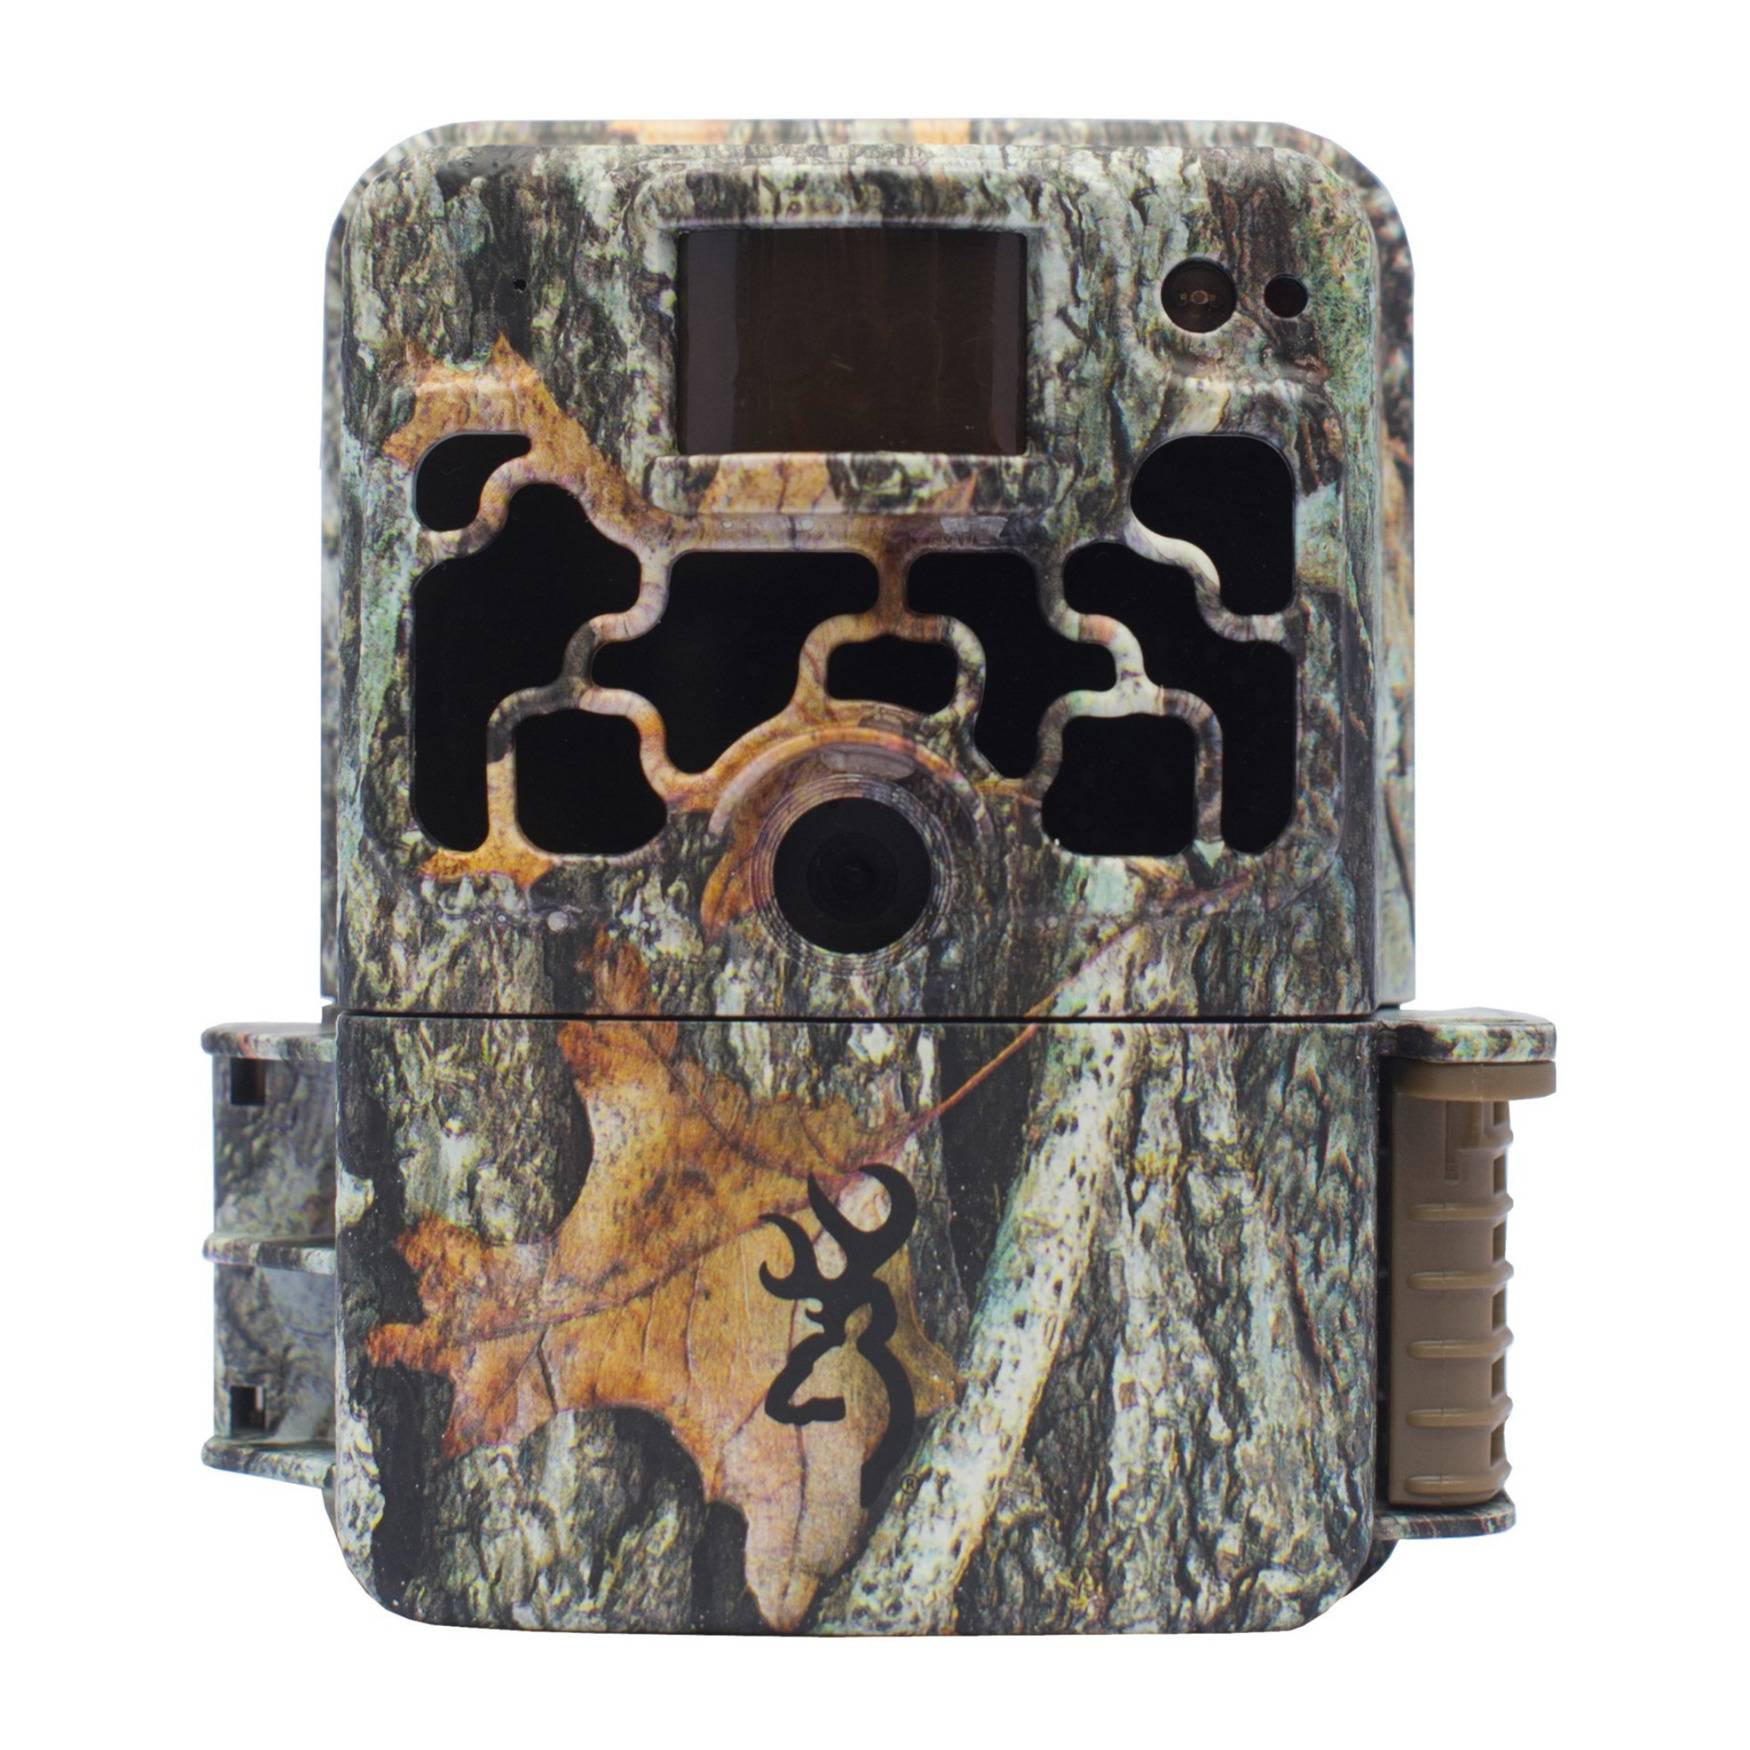 Browning Trail Cameras Dark Ops Extreme 16MP Game Camera